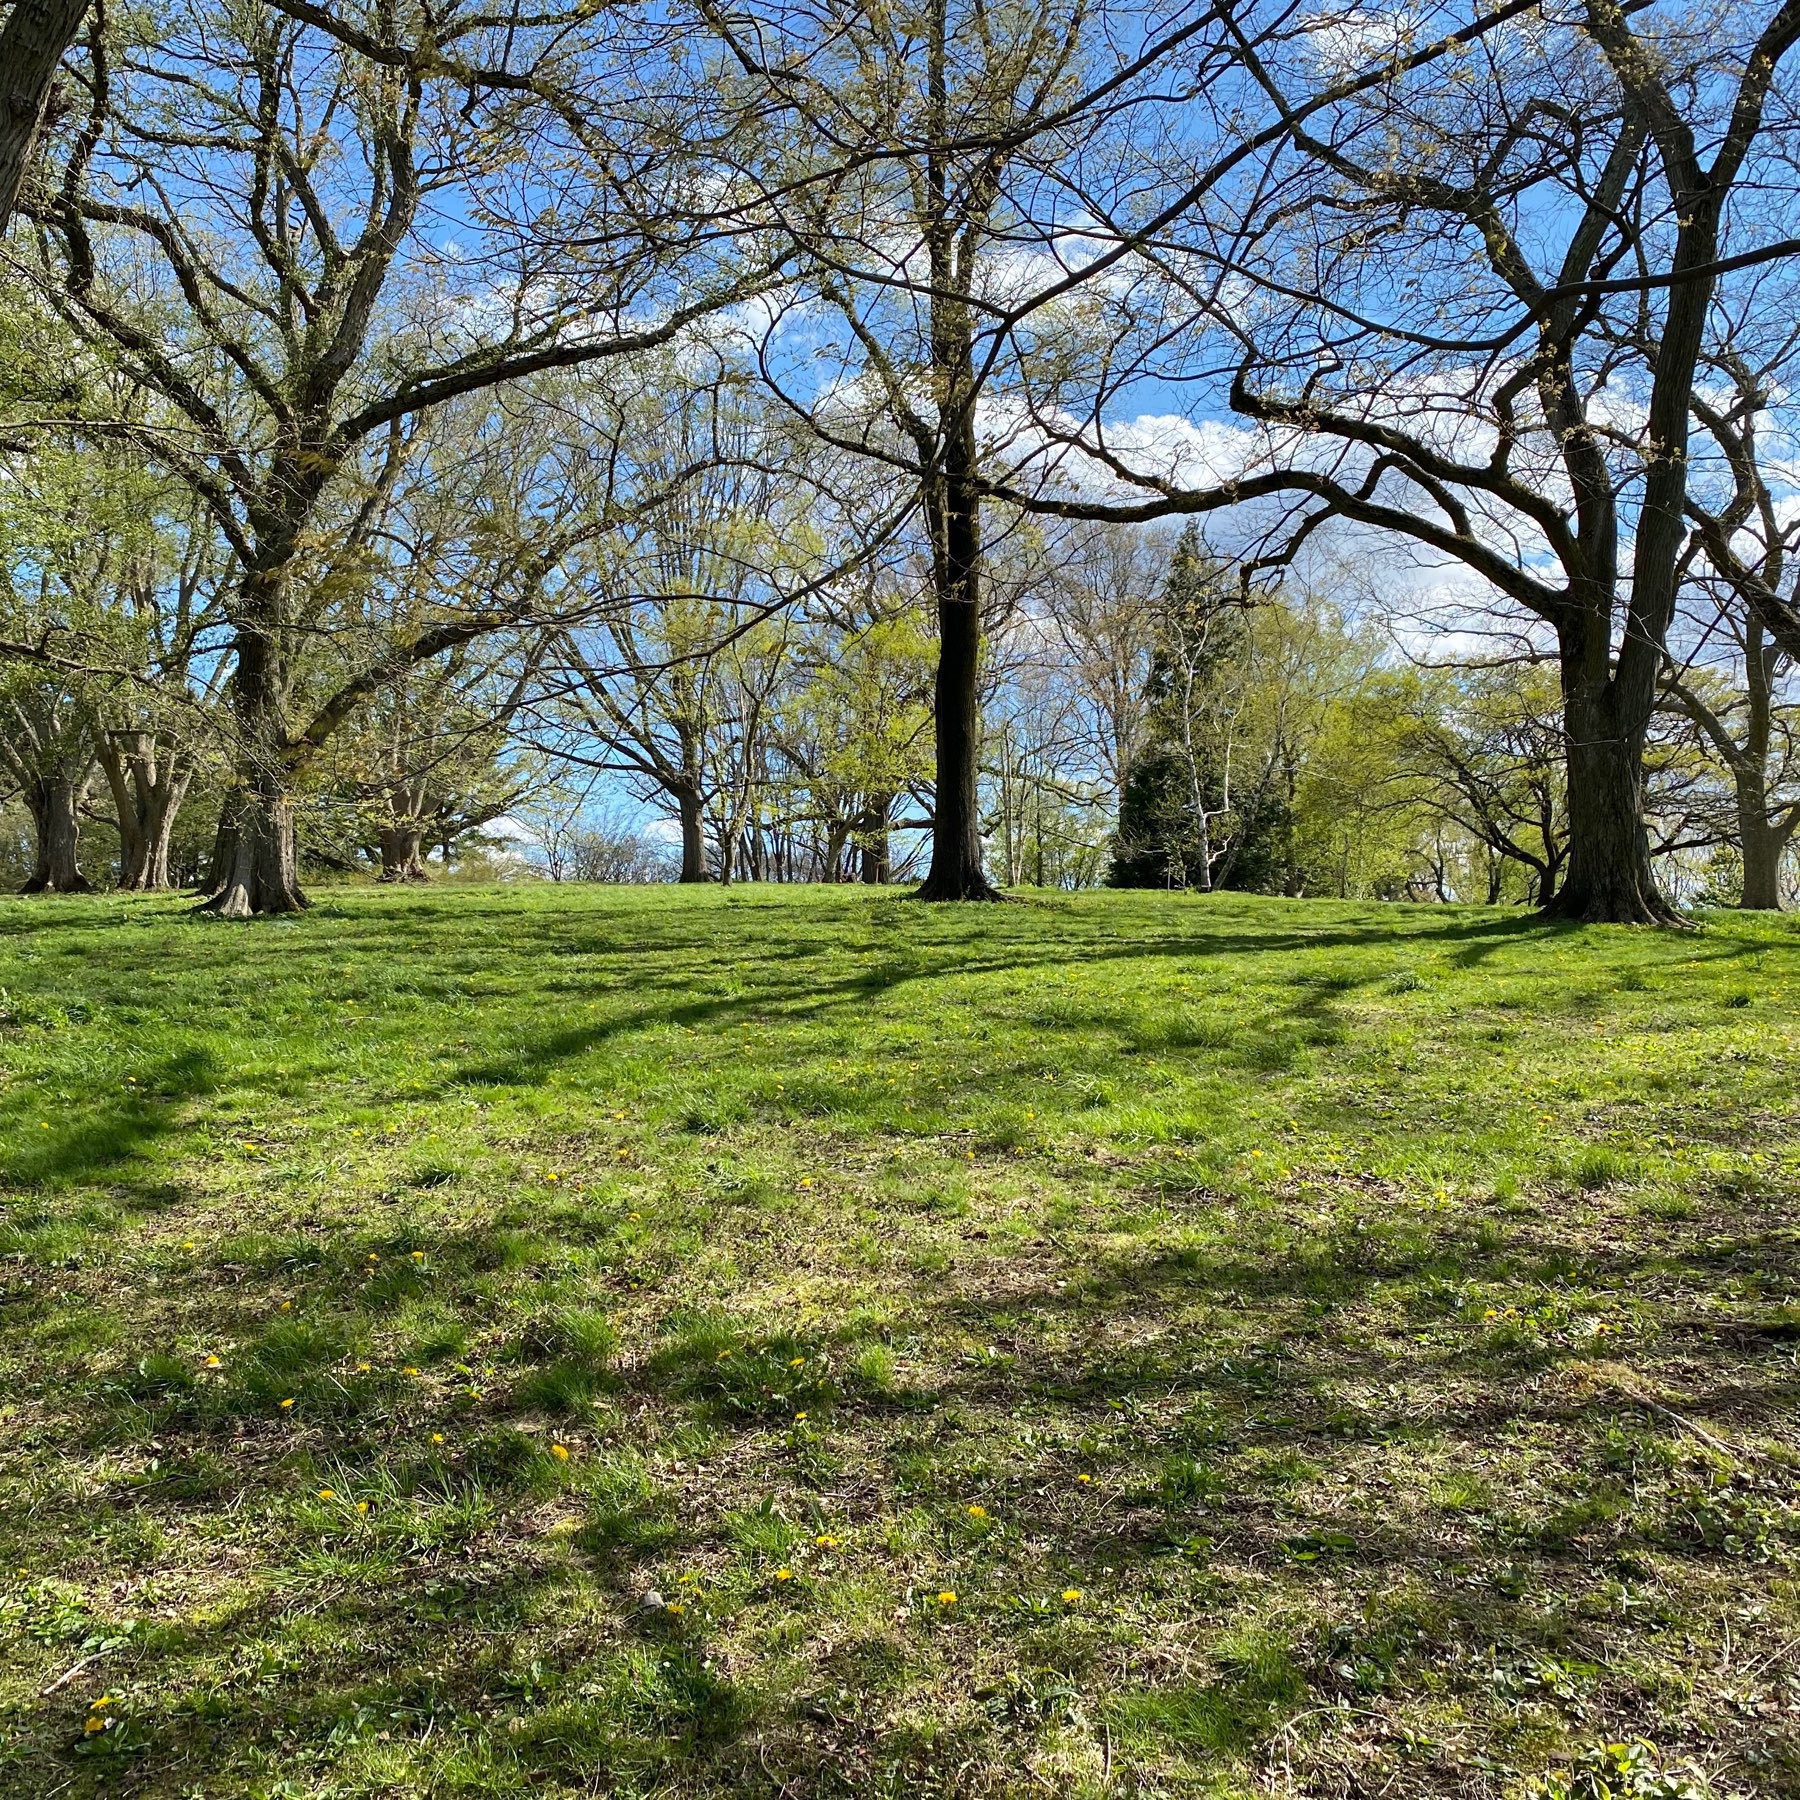 picture of a grassy hill with trees and a blue sky behind